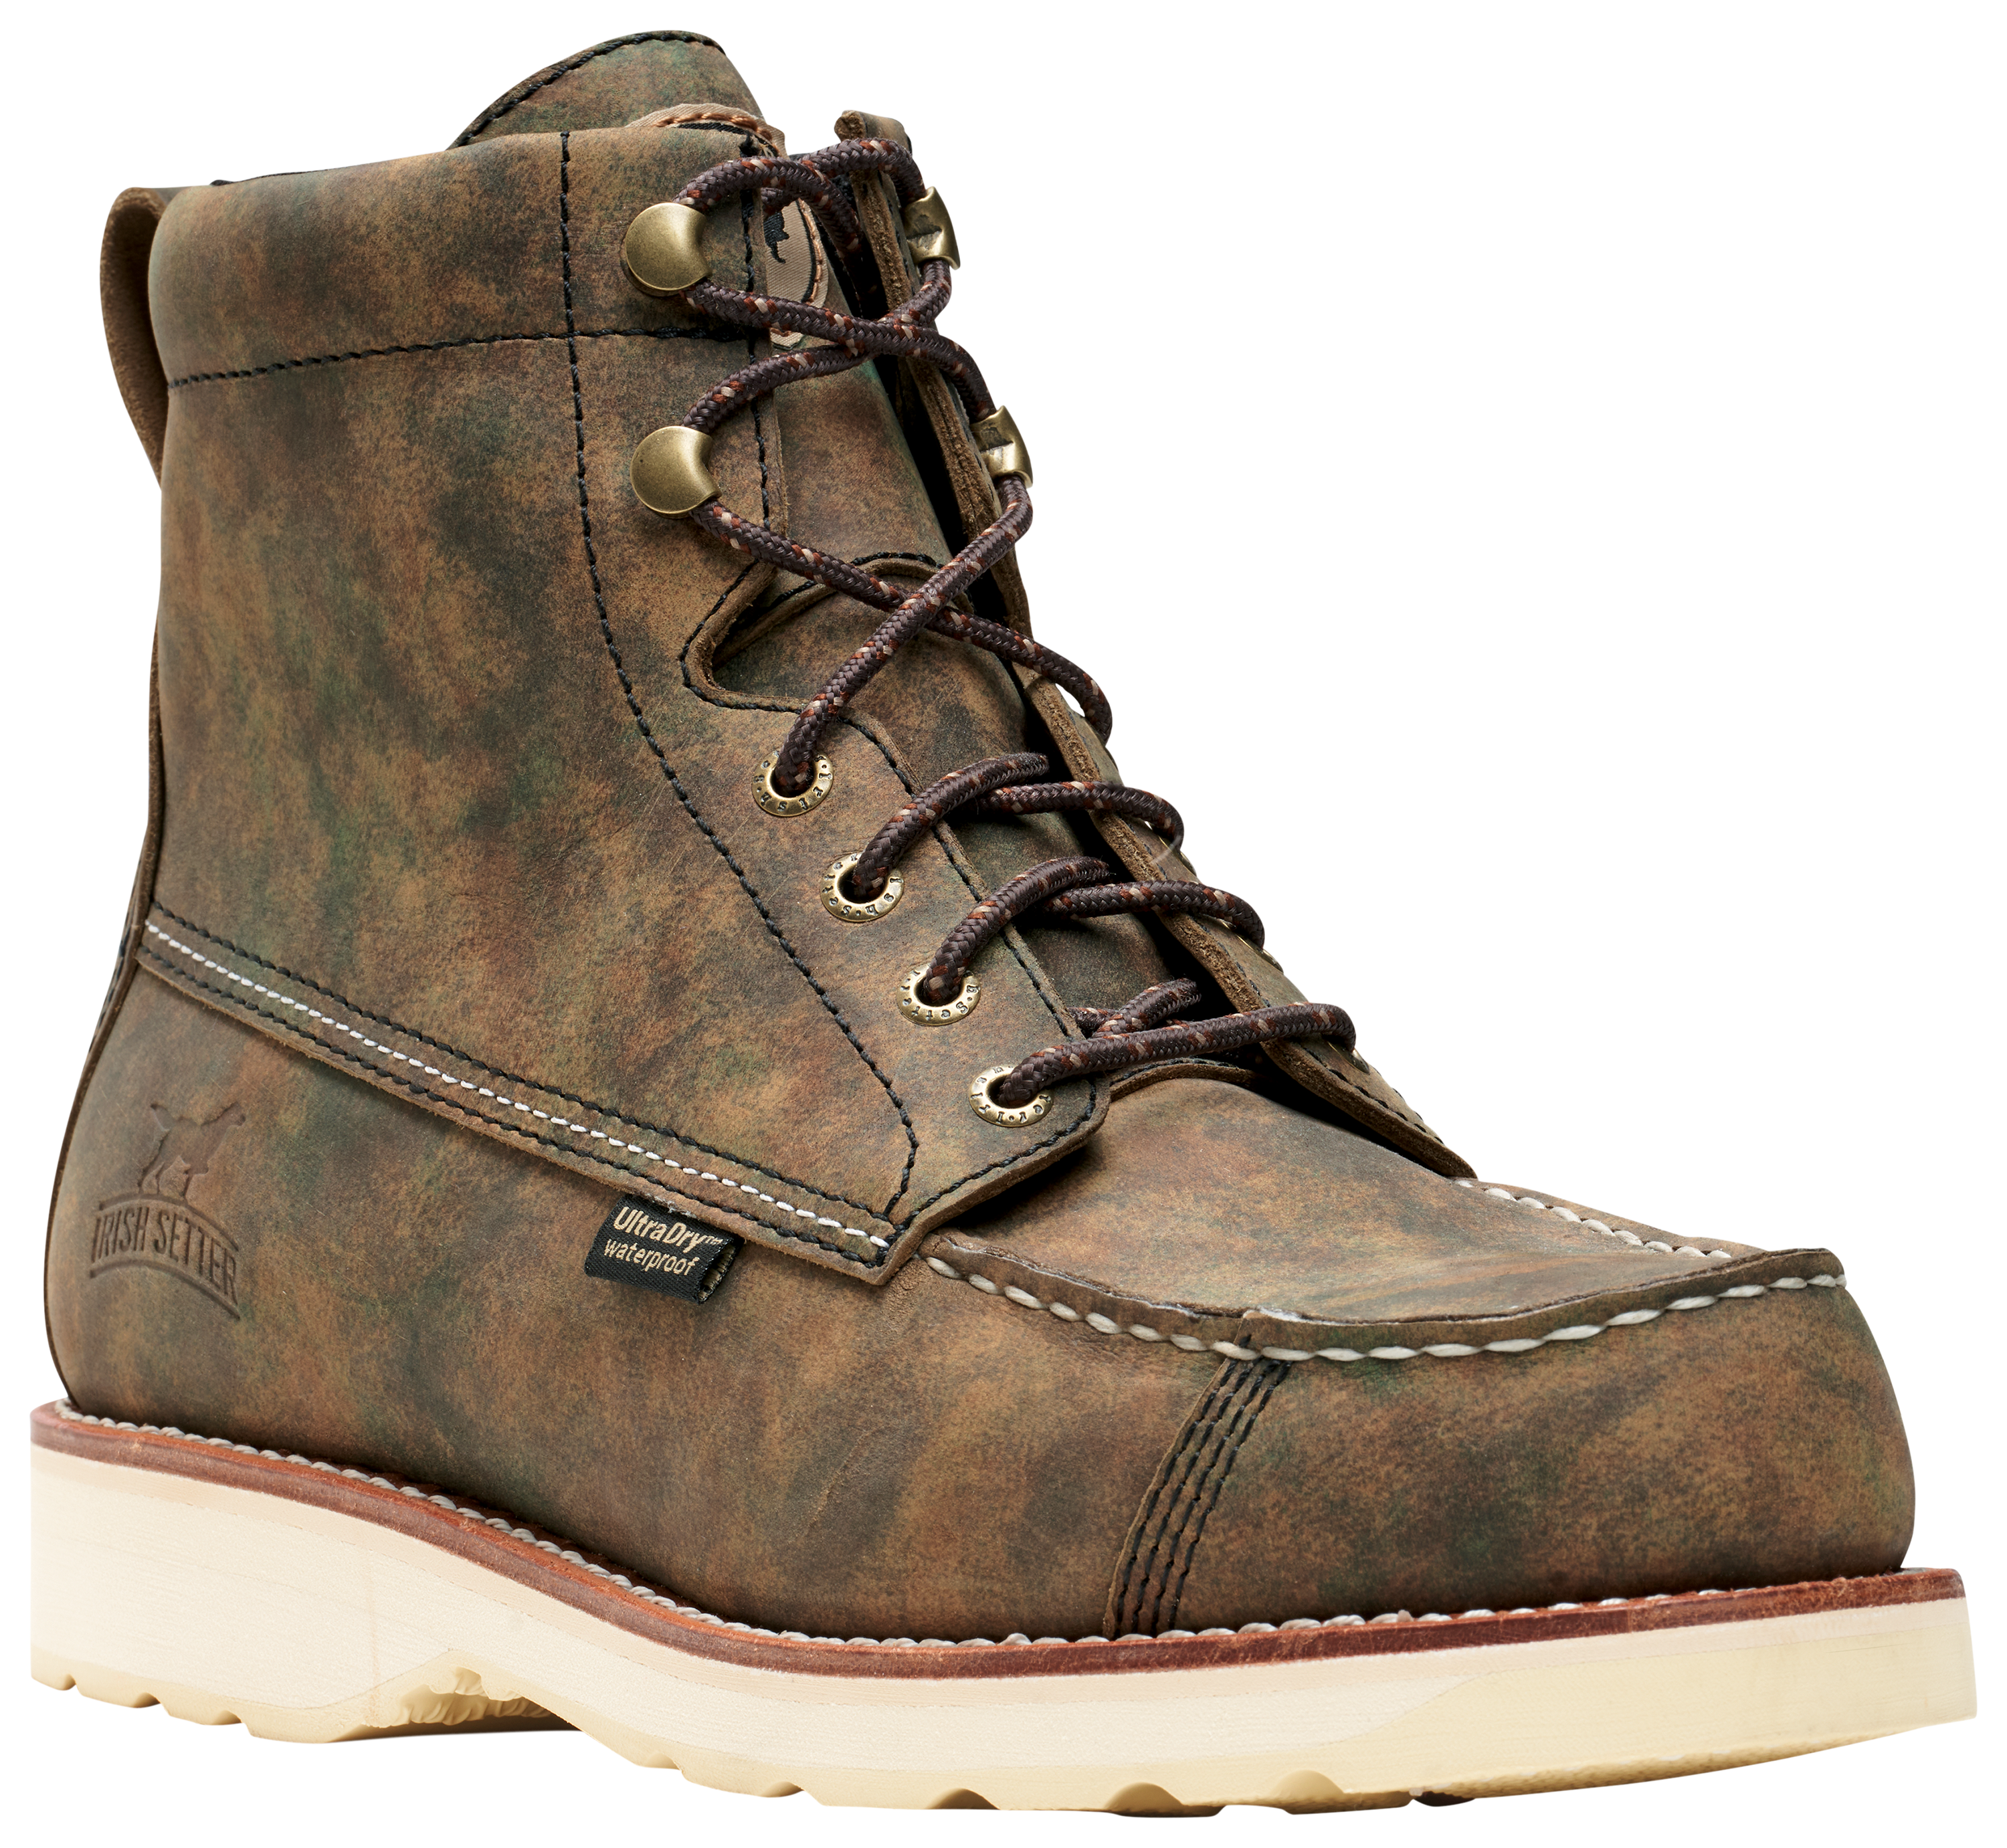 Irish Setter Wingshooter 7 Waterproof Hunting Boots for Men - Earth Camo - 9.5M